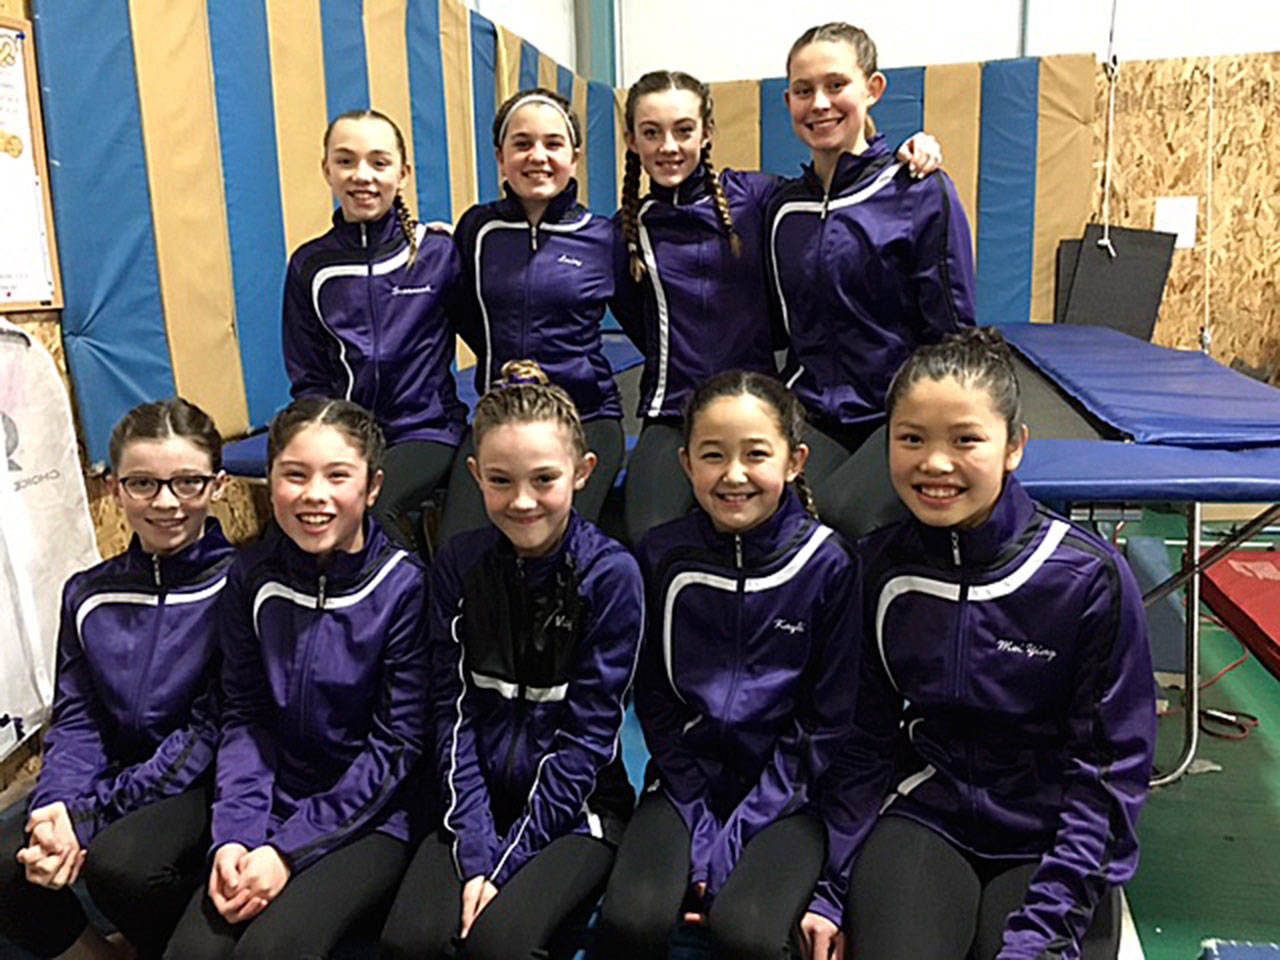 Klahhane gymnasts bound for state